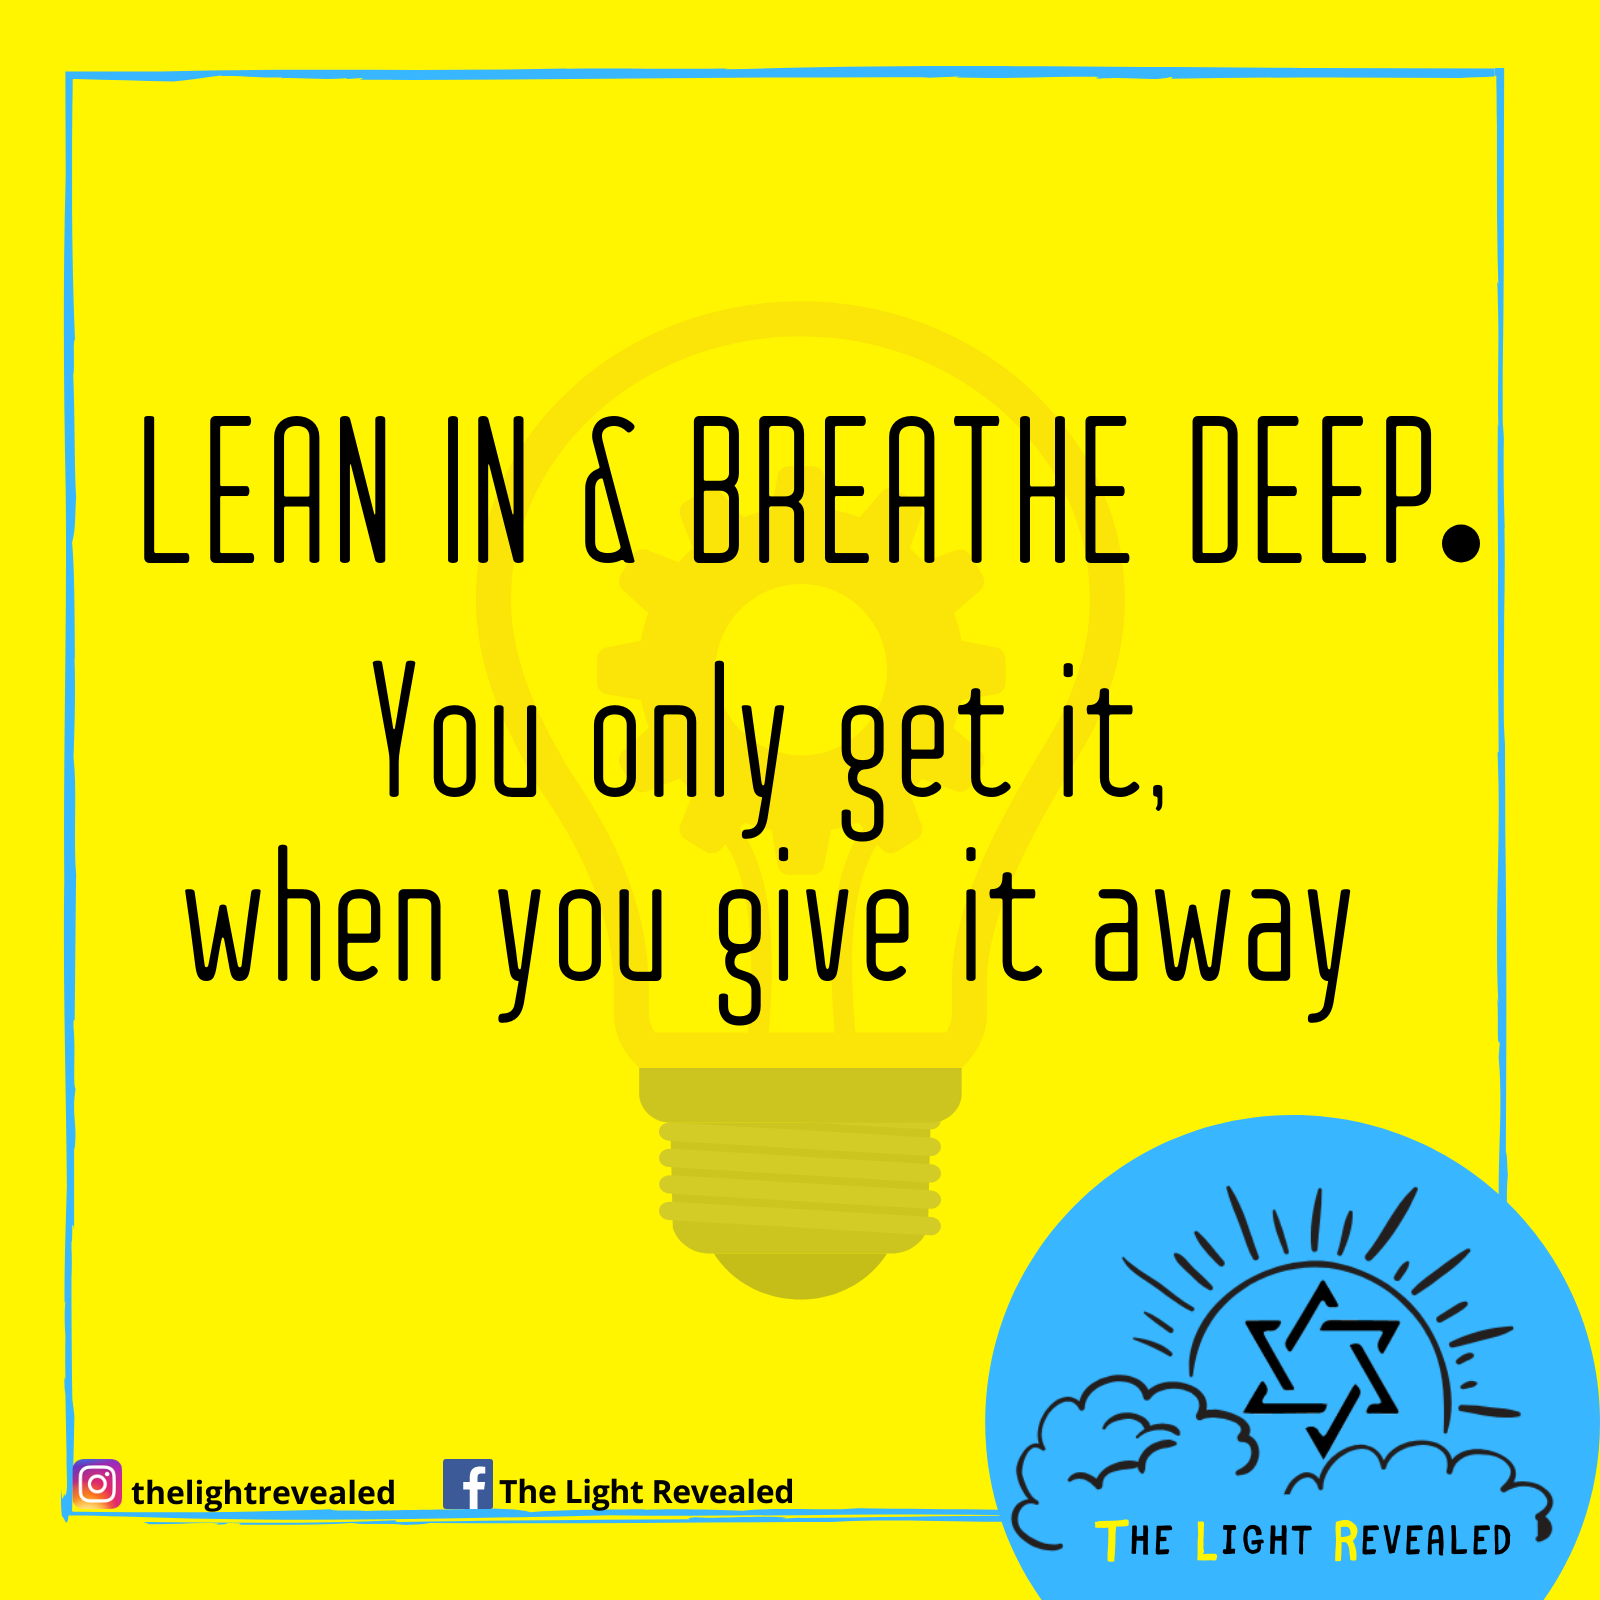 Lean in and breath deep #5.png